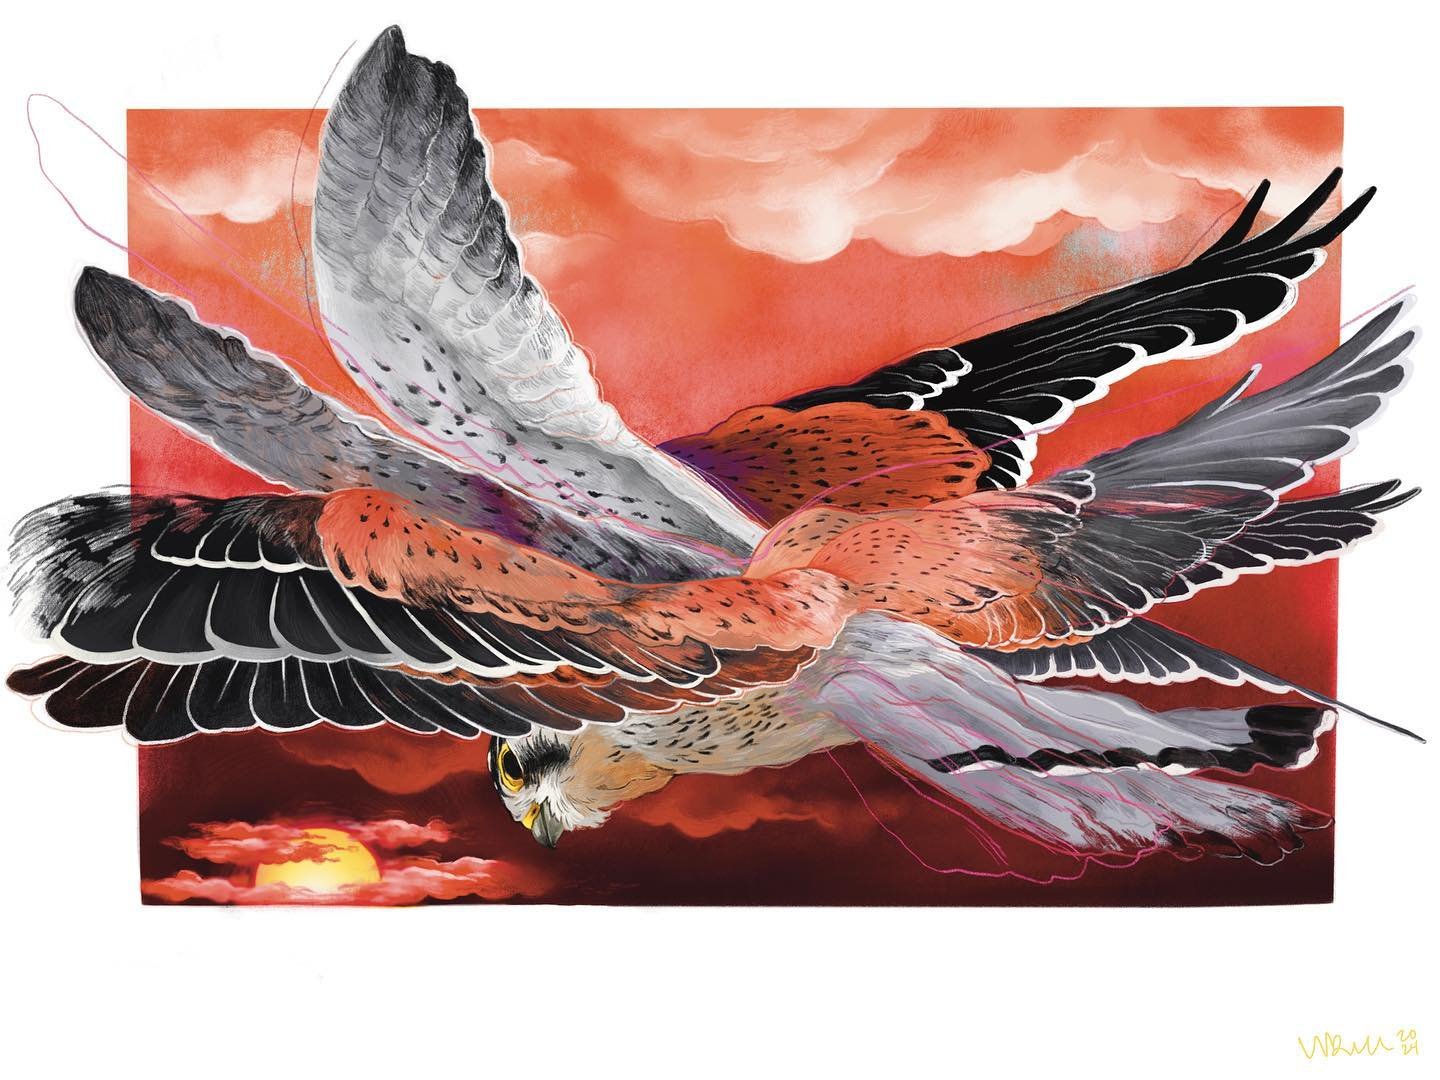 &ldquo;Stabilization&rdquo; 24&rsquo;&rsquo;x36&rsquo;&rsquo; 2024

The American kestrel is the only bird of prey able to hover in the air. They use this stabilization technique to hunt. Kestrels hover and maneuver on the wind - using their body, win